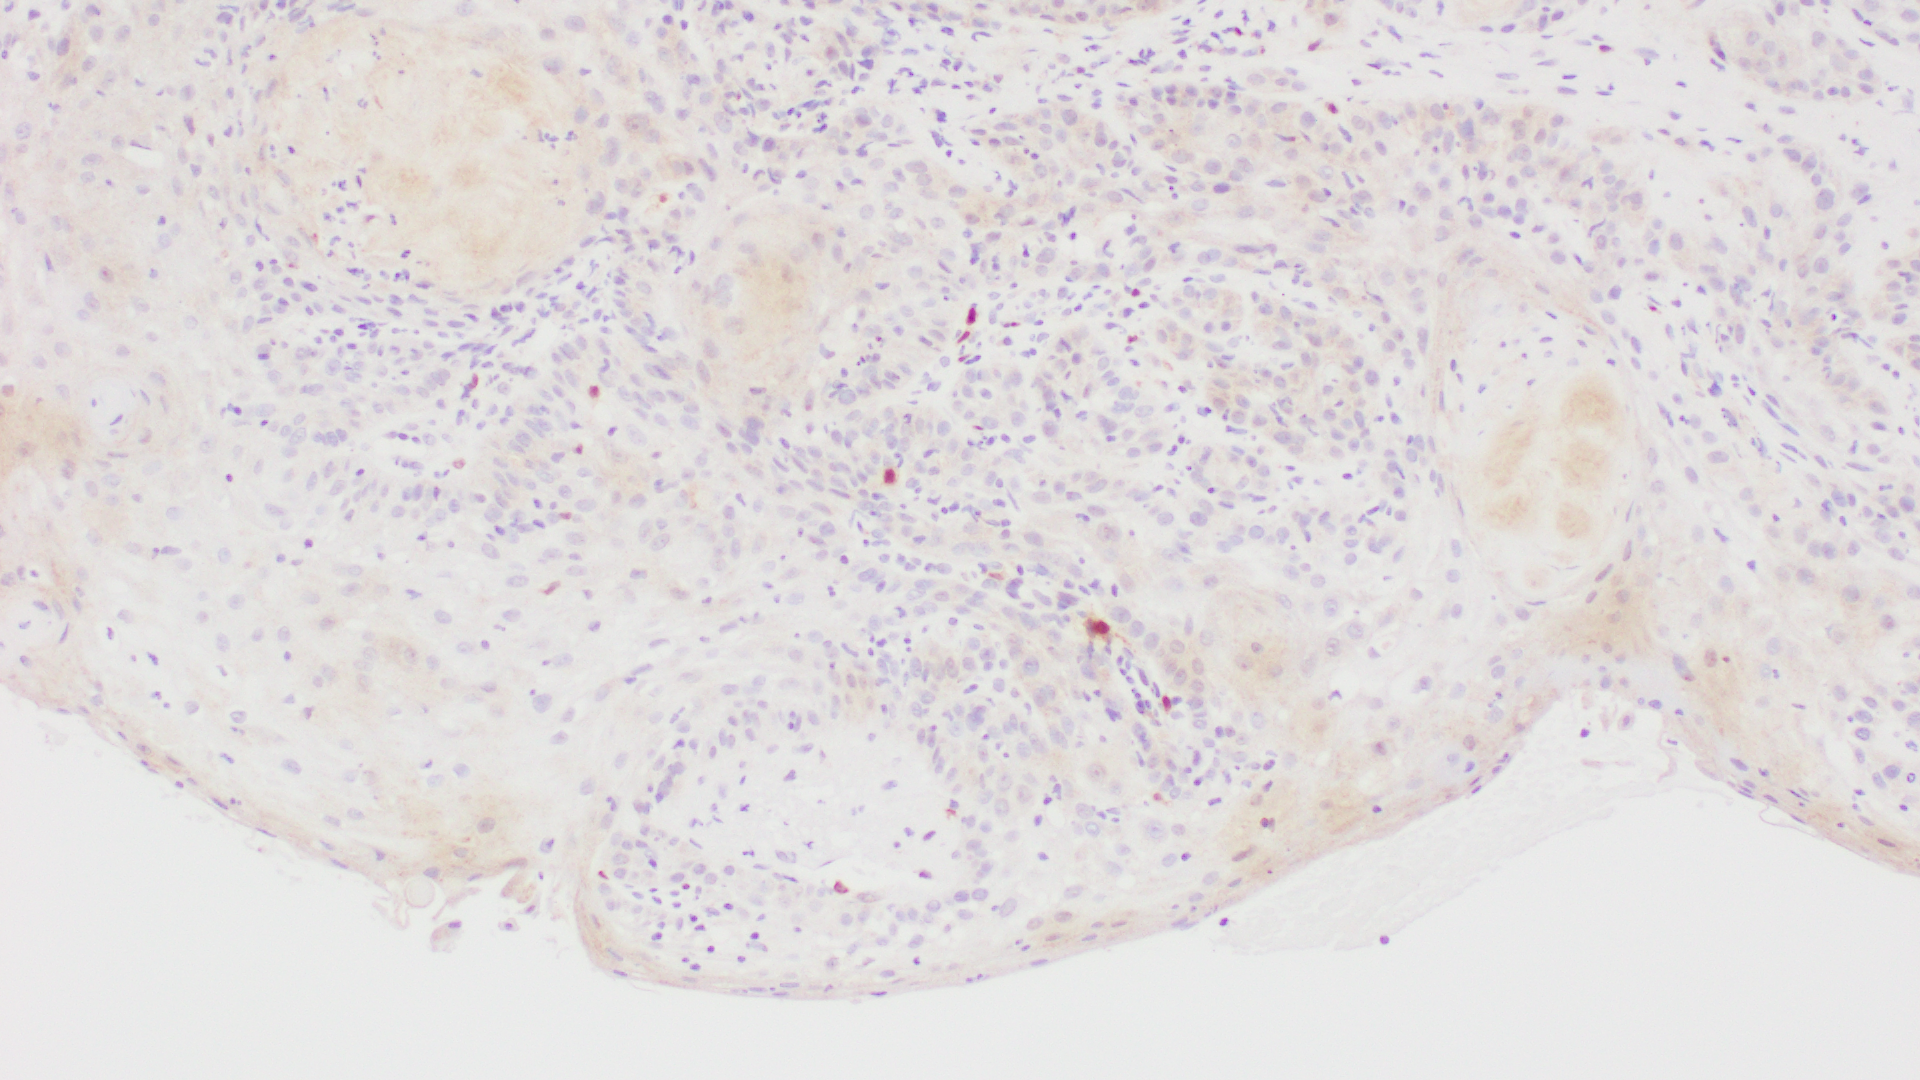 Histopathology Slide of Vulvar Squamous Cell Carcinoma with P16 stain, showing positivity for Human Papilloma virus(HPV 16). 